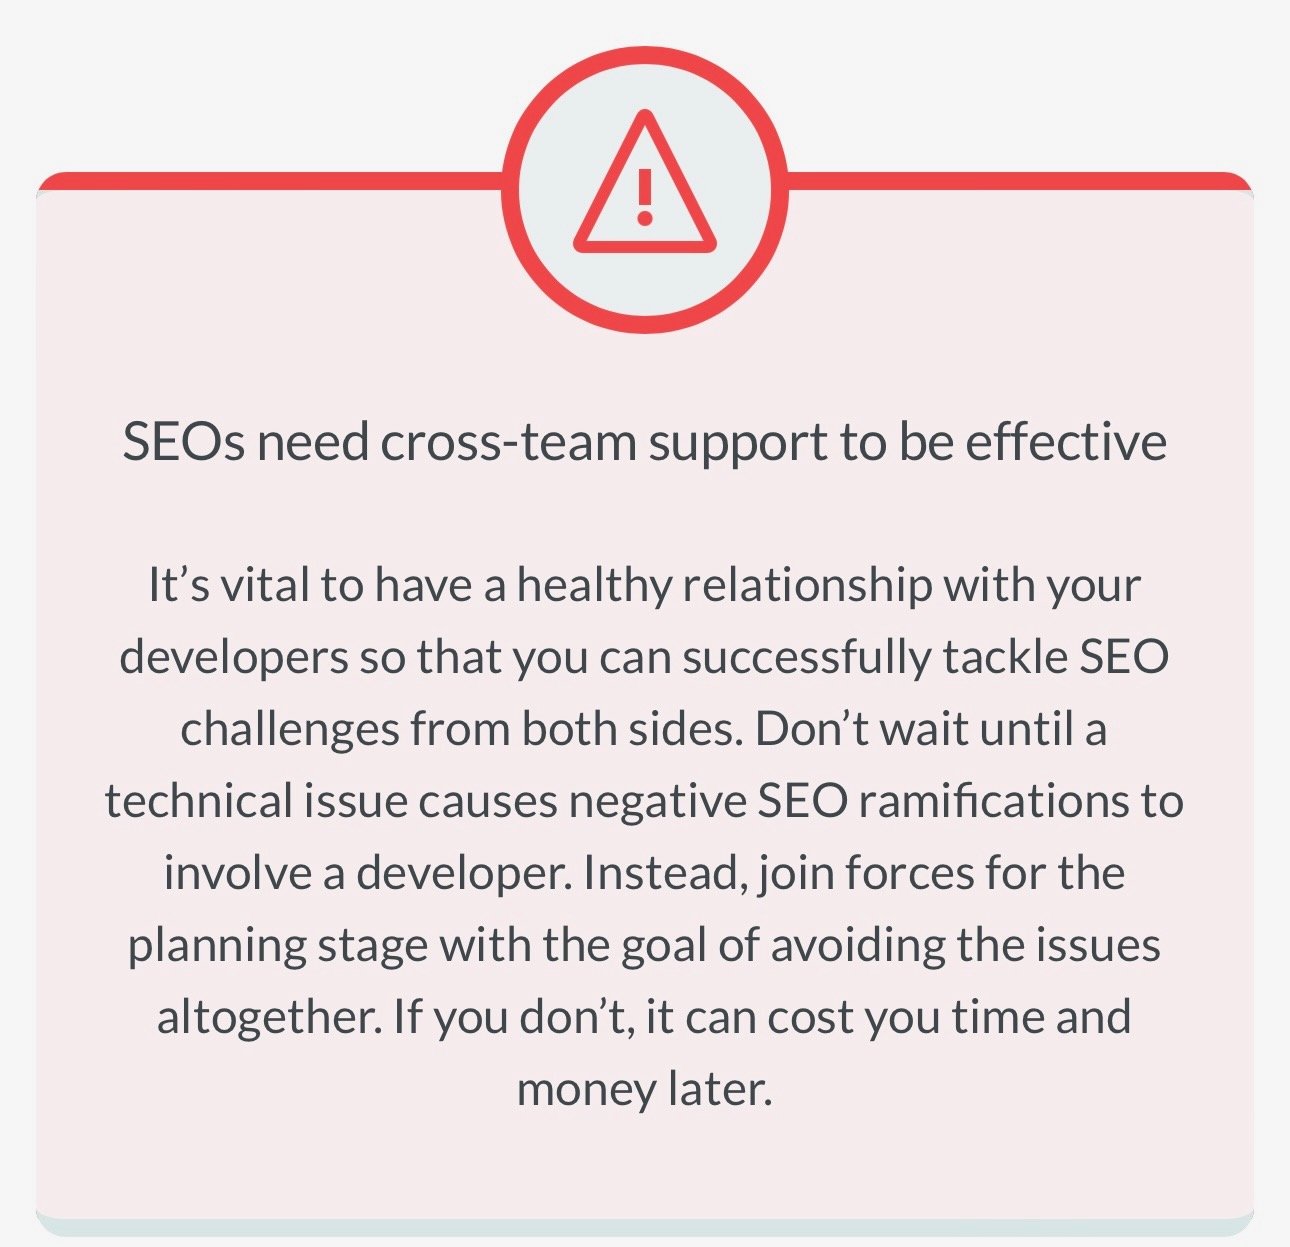 SEO needs cross team support to be effective